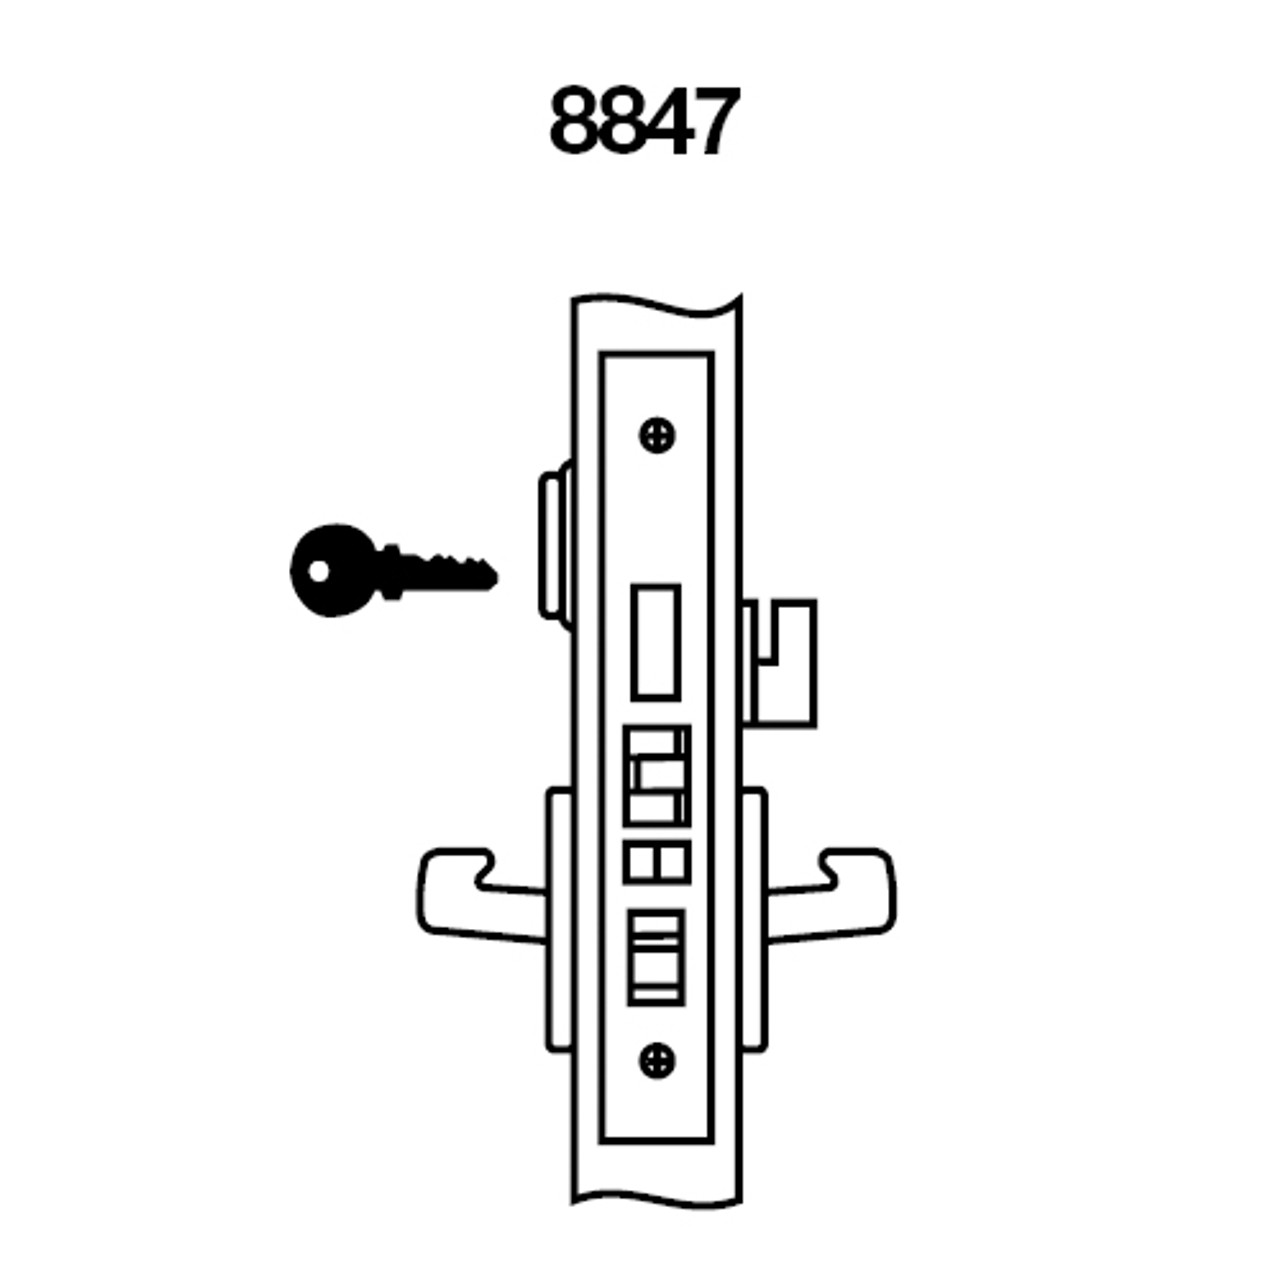 CRCN8847FL-605 Yale 8800FL Series Single Cylinder with Deadbolt Mortise Entrance Lock with Indicator with Carmel Lever in Bright Brass